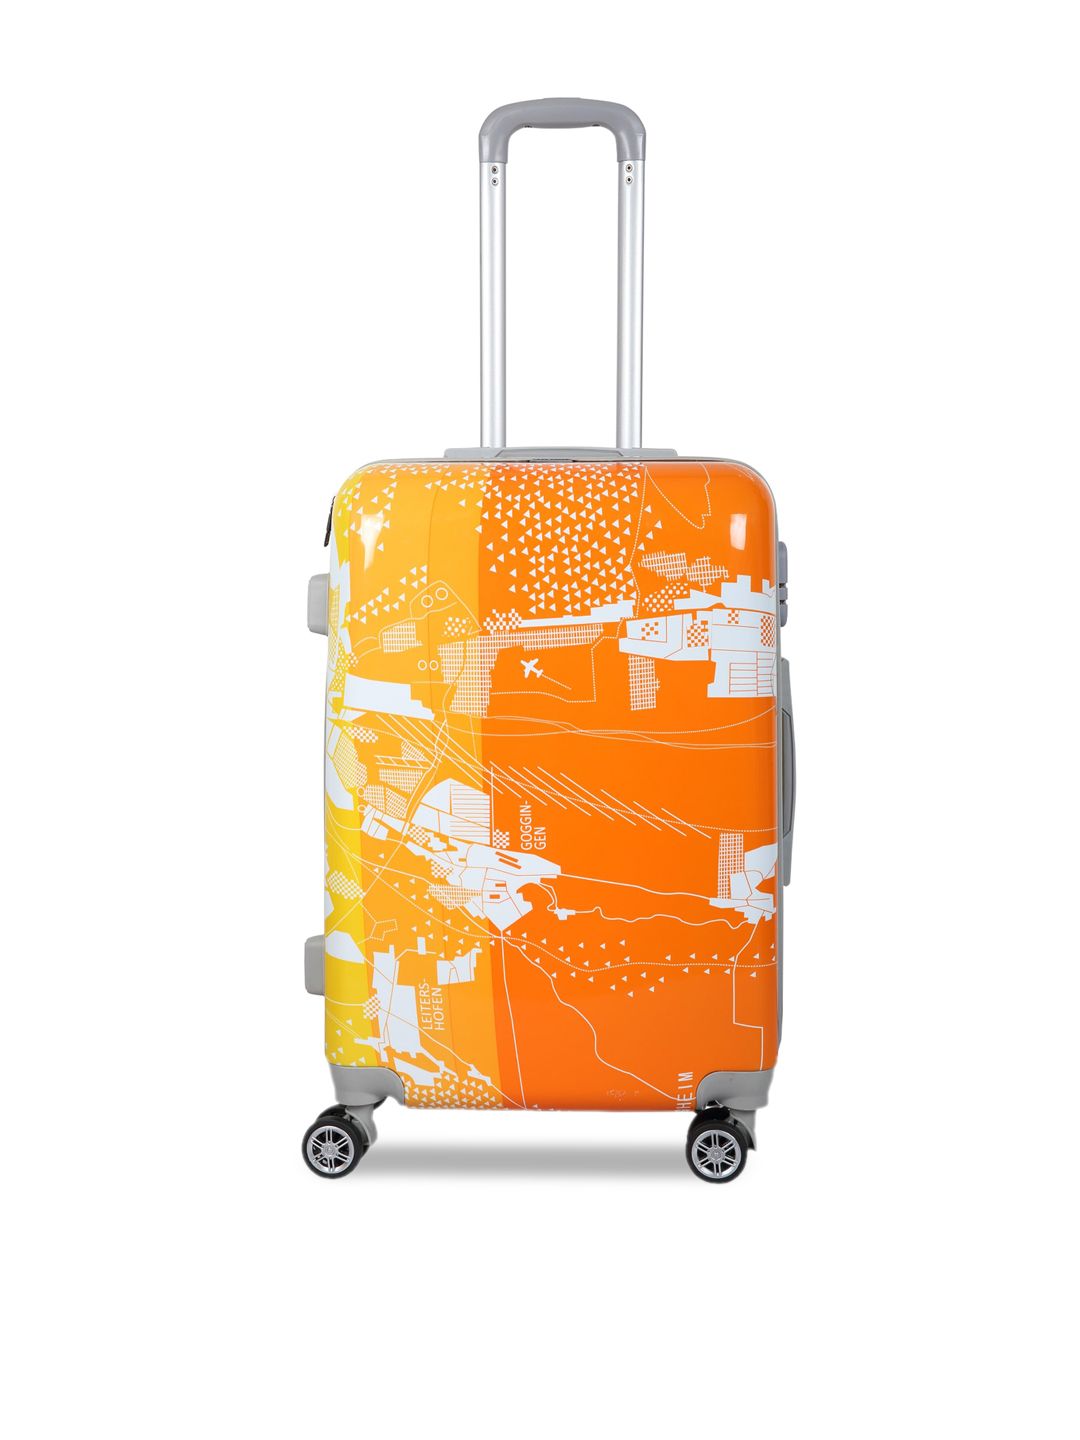 Polo Class Orange & White Printed Hard Sided Cabin Trolley Suitcase Price in India